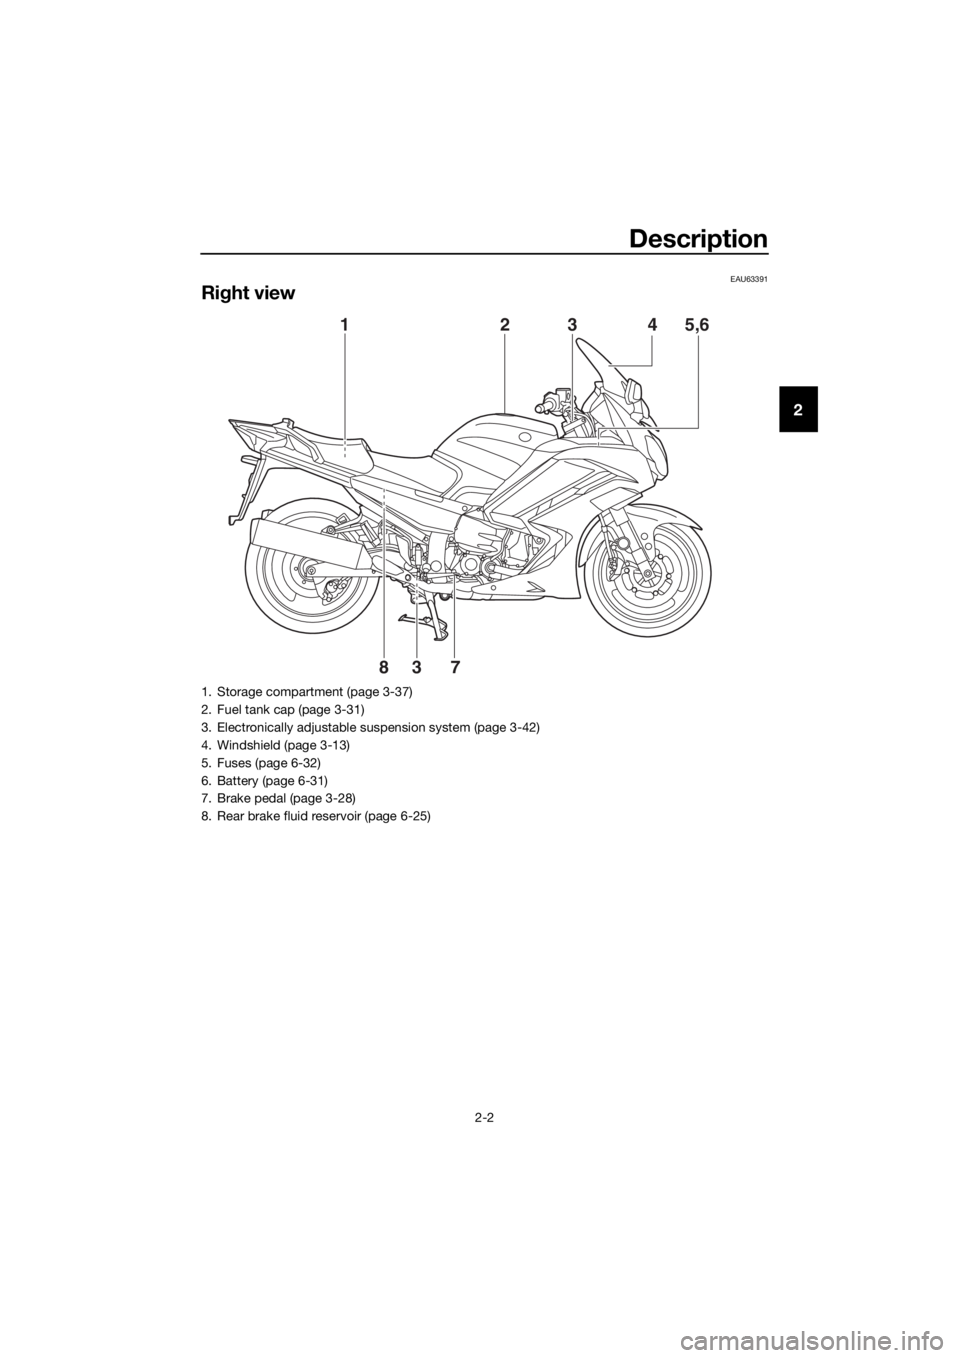 YAMAHA FJR1300AS 2018 User Guide Description
2-2
2
EAU63391
Right view
78 5,6
4
23
1
3
1. Storage compartment (page 3-37)
2. Fuel tank cap (page 3-31)
3. Electronically adjustable suspension system (page 3-42)
4. Windshield (page 3-1